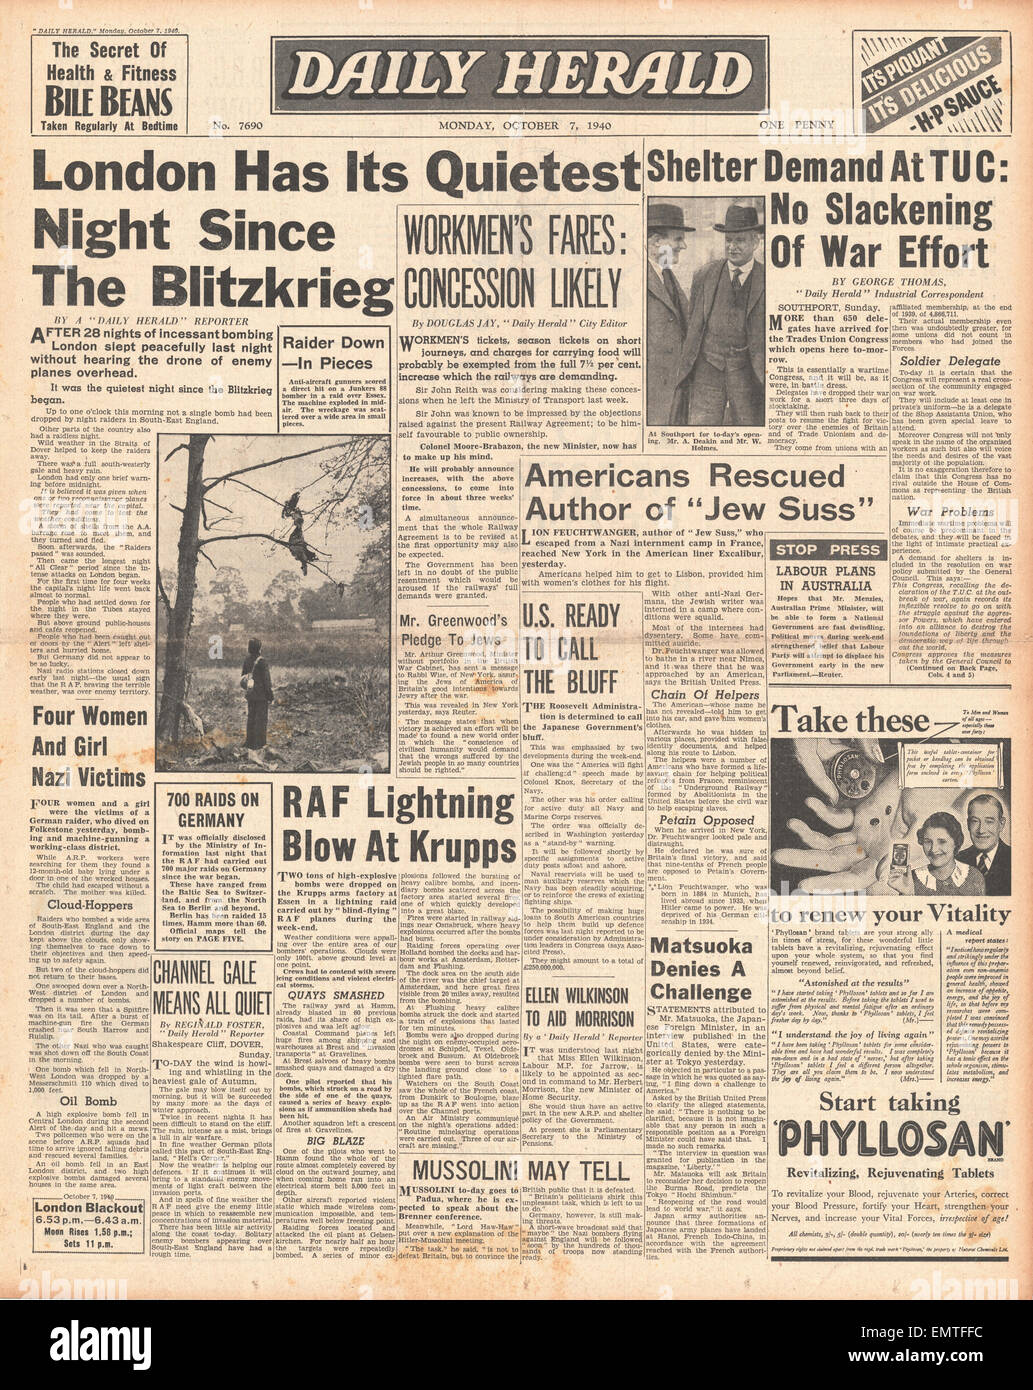 1940 front page Daily Herald London has quietest night since the Blitzkrieg Stock Photo